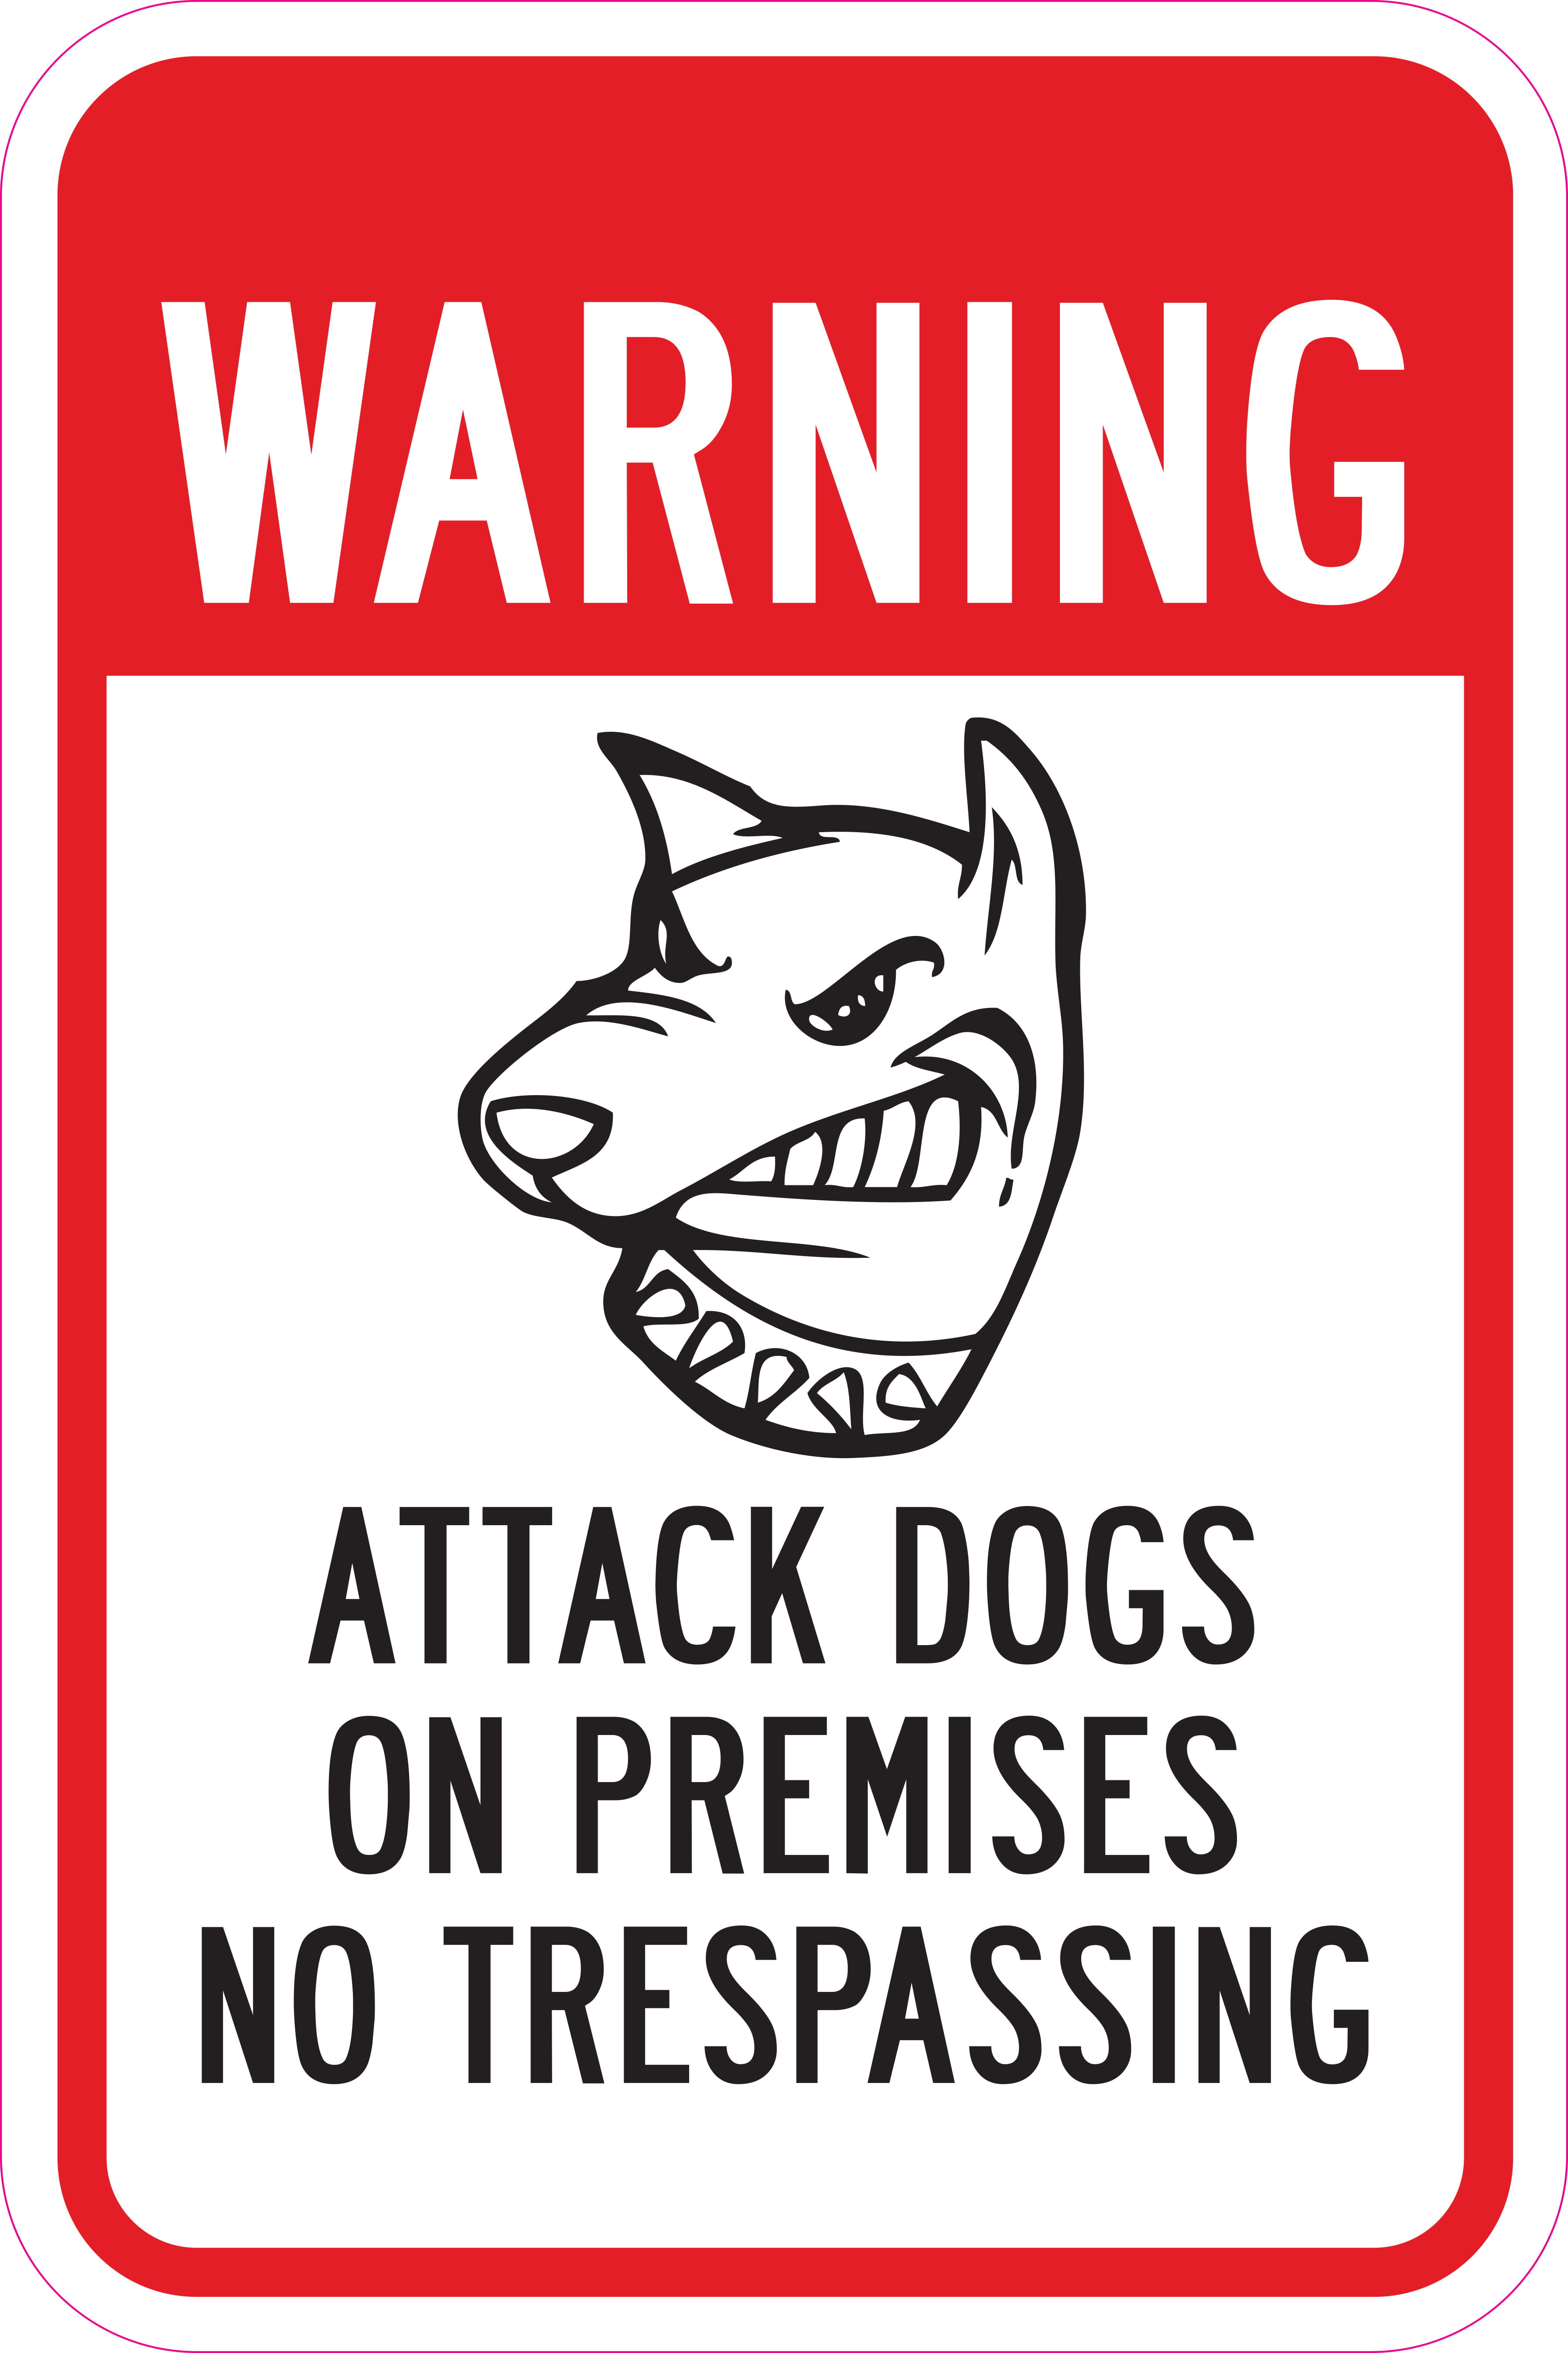 METAL HEAVYWEIGHT ALUMINUM "DOGS ON PREMISES" 10"x7" WARNING SIGNS 4 SIGN SET 